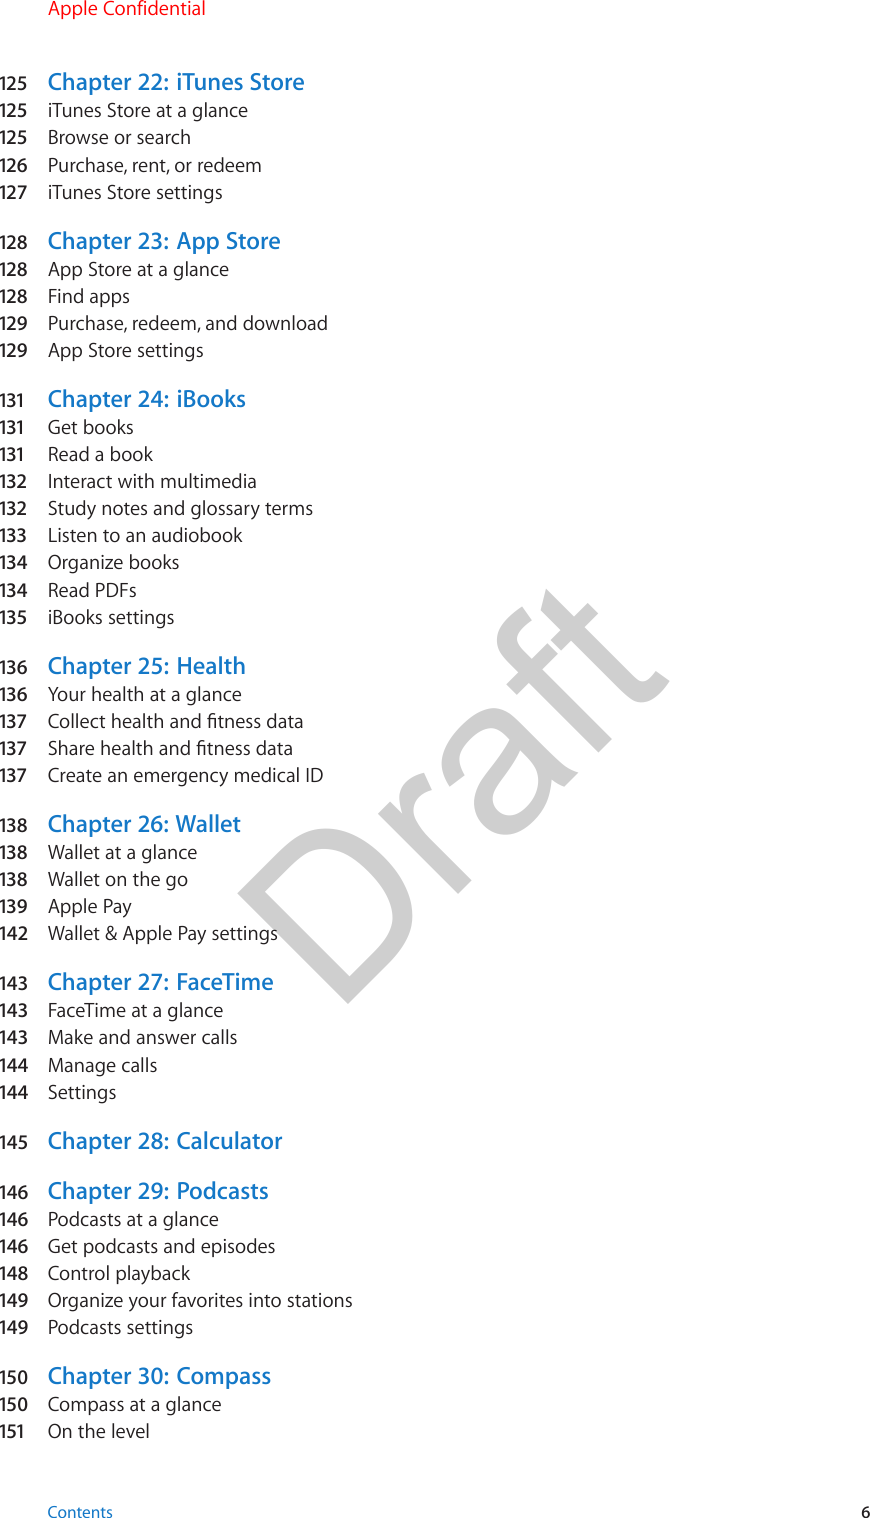 125  Chapter 22:  iTunes Store125  iTunes Store at a glance125  Browse or search126   Purchase, rent, or redeem127   iTunes Store settings128  Chapter 23:  App Store128  App Store at a glance128  Find apps129  Purchase, redeem, and download129  App Store settings131   Chapter 24:  iBooks131   Get books131   Read a book132  Interact with multimedia132  Study notes and glossary terms133  Listen to an audiobook134  Organize books134  Read PDFs135  iBooks settings136   Chapter 25:  Health136   Your health at a glance137  Collect health and tness data137  Share health and tness data137  Create an emergency medical ID138   Chapter  26:  Wallet138   Wallet at a glance138   Wallet on the go139   Apple Pay142  Wallet &amp; Apple Pay settings143  Chapter 27:  FaceTime143  FaceTime at a glance143  Make and answer calls144  Manage calls144  Settings145  Chapter 28:  Calculator146  Chapter 29:  Podcasts146  Podcasts at a glance146  Get podcasts and episodes148  Control playback149  Organize your favorites into stations149  Podcasts settings150  Chapter 30:  Compass150  Compass at a glance151  On the levelContents 6Apple ConfidentialDraft